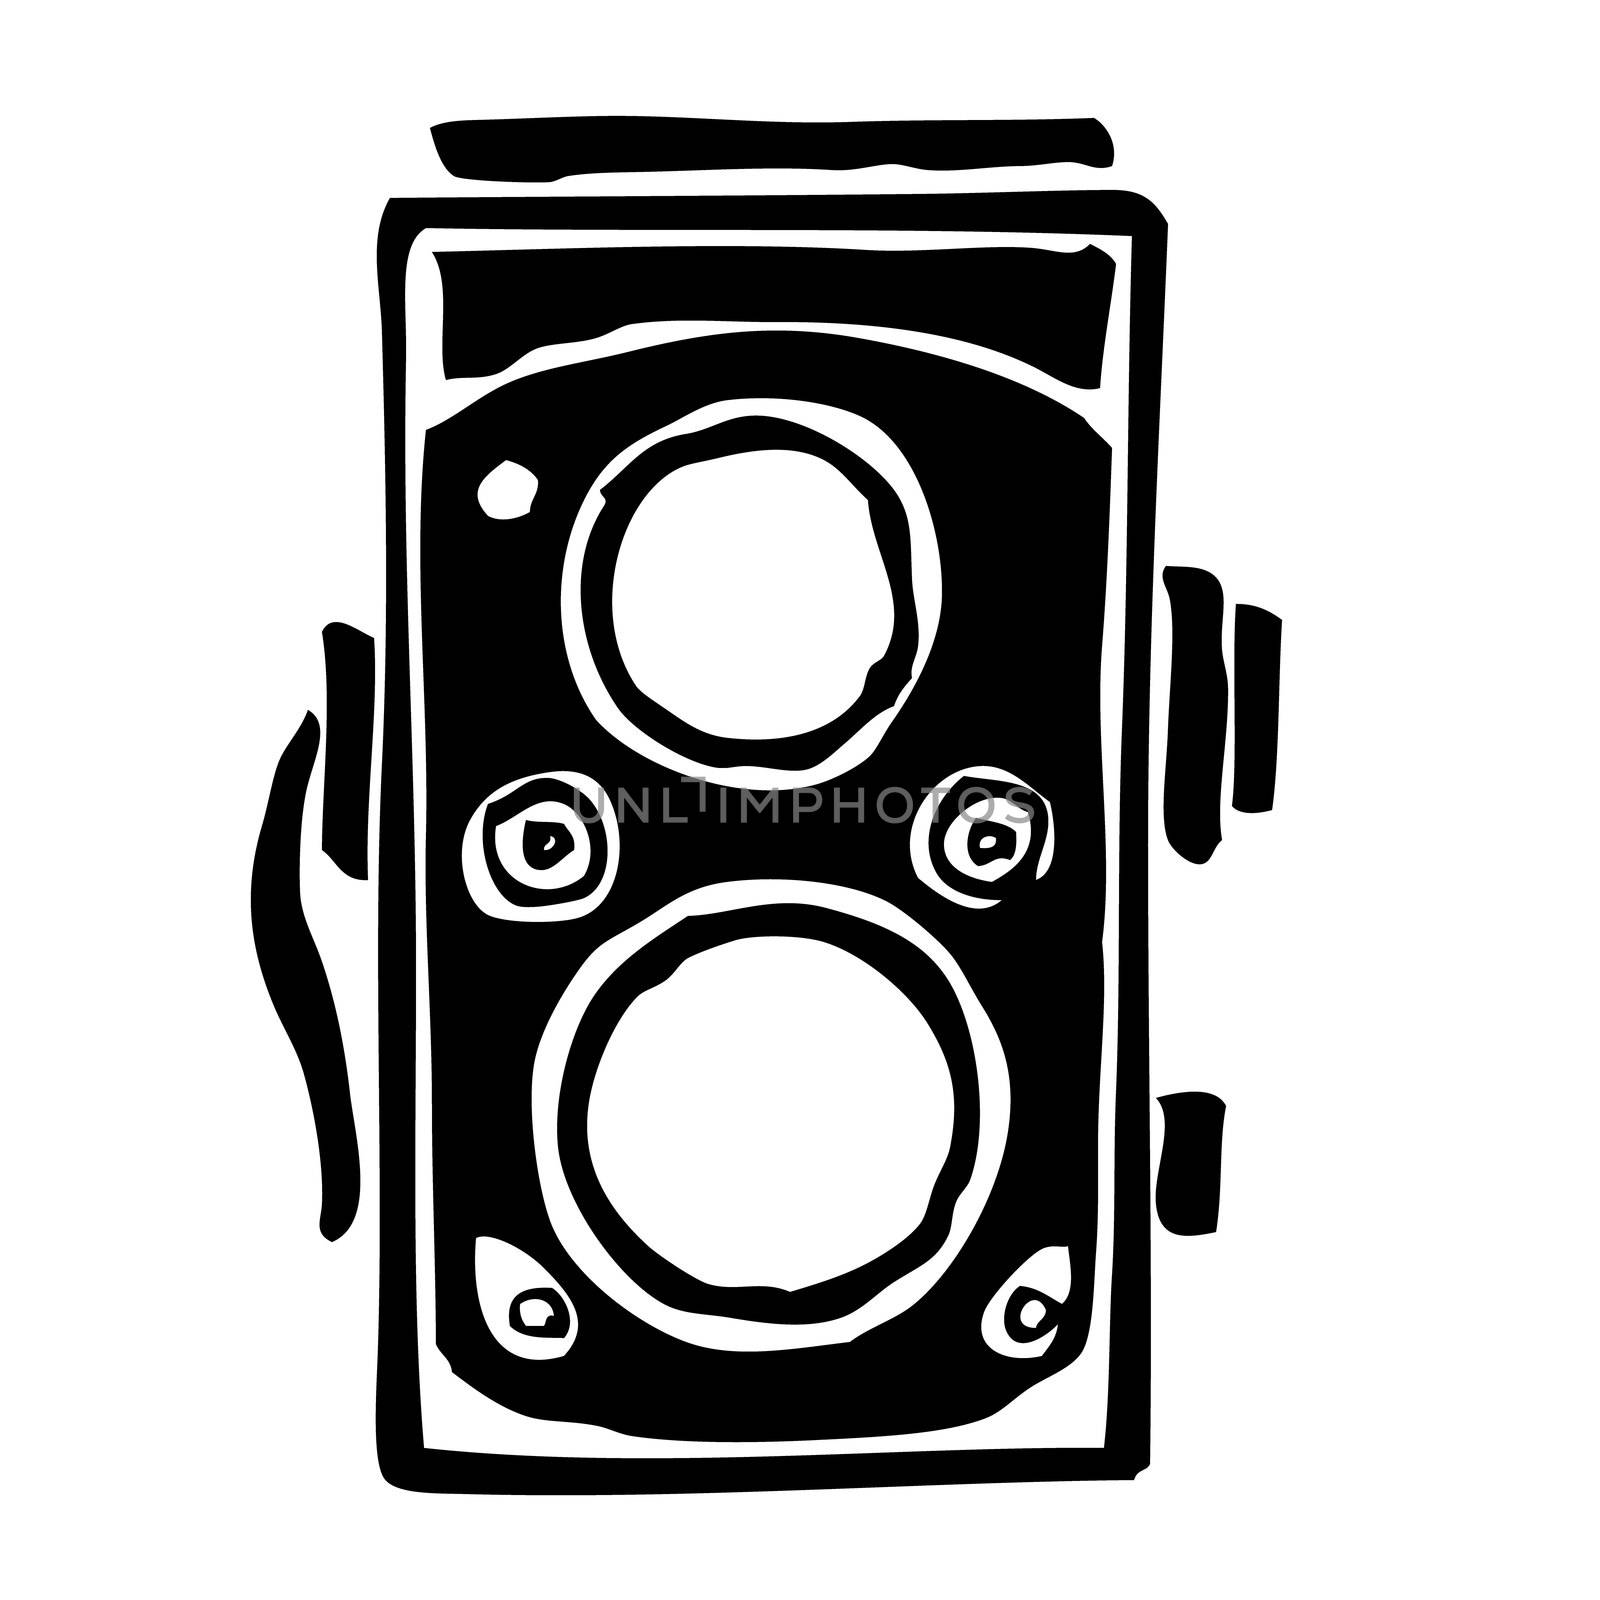 freehand sketch illustration of Twin lens reflex camera, doodle hand drawn 